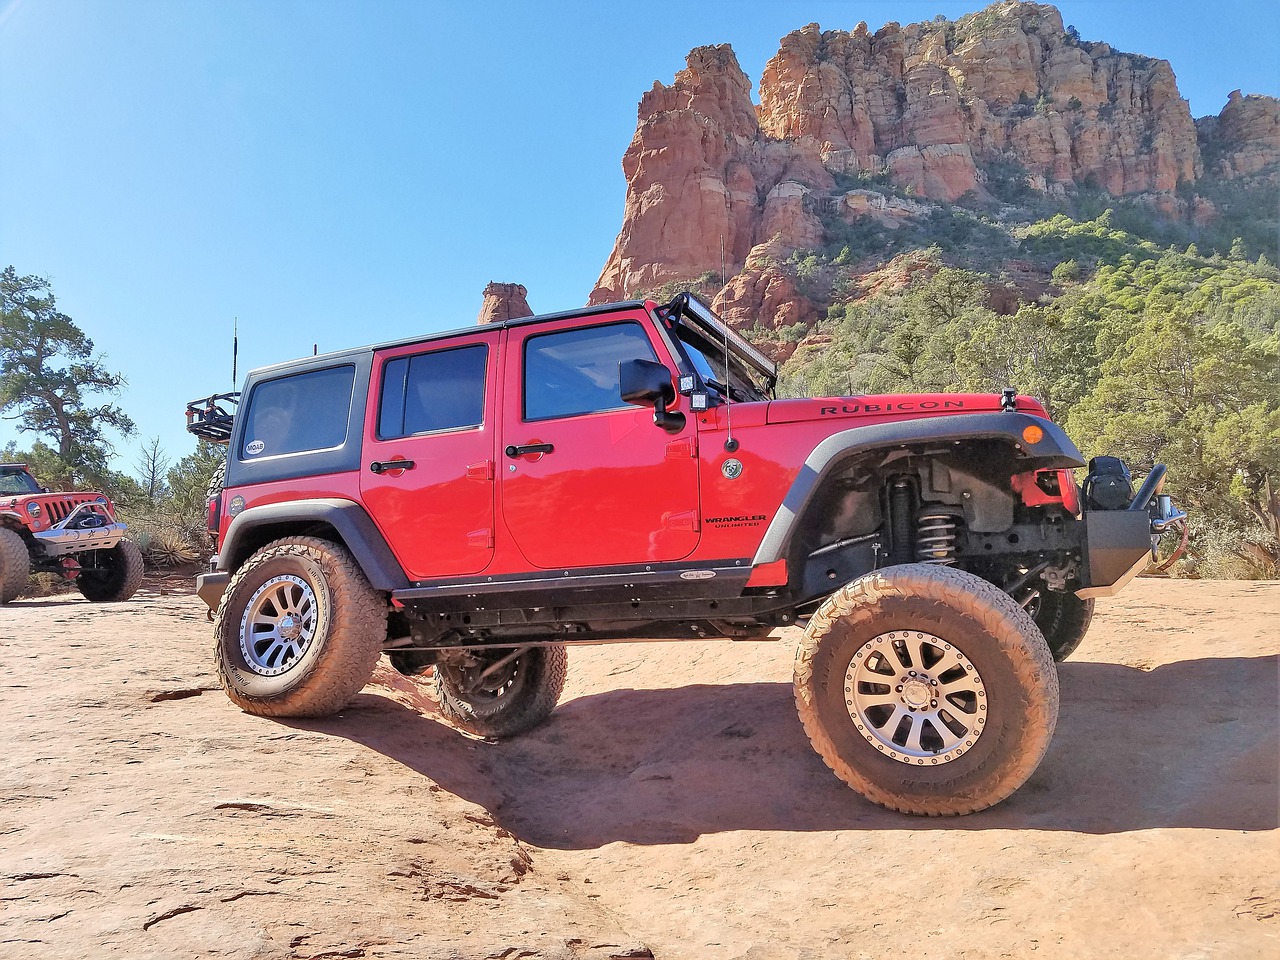 A red jeep in the Sedona mountains